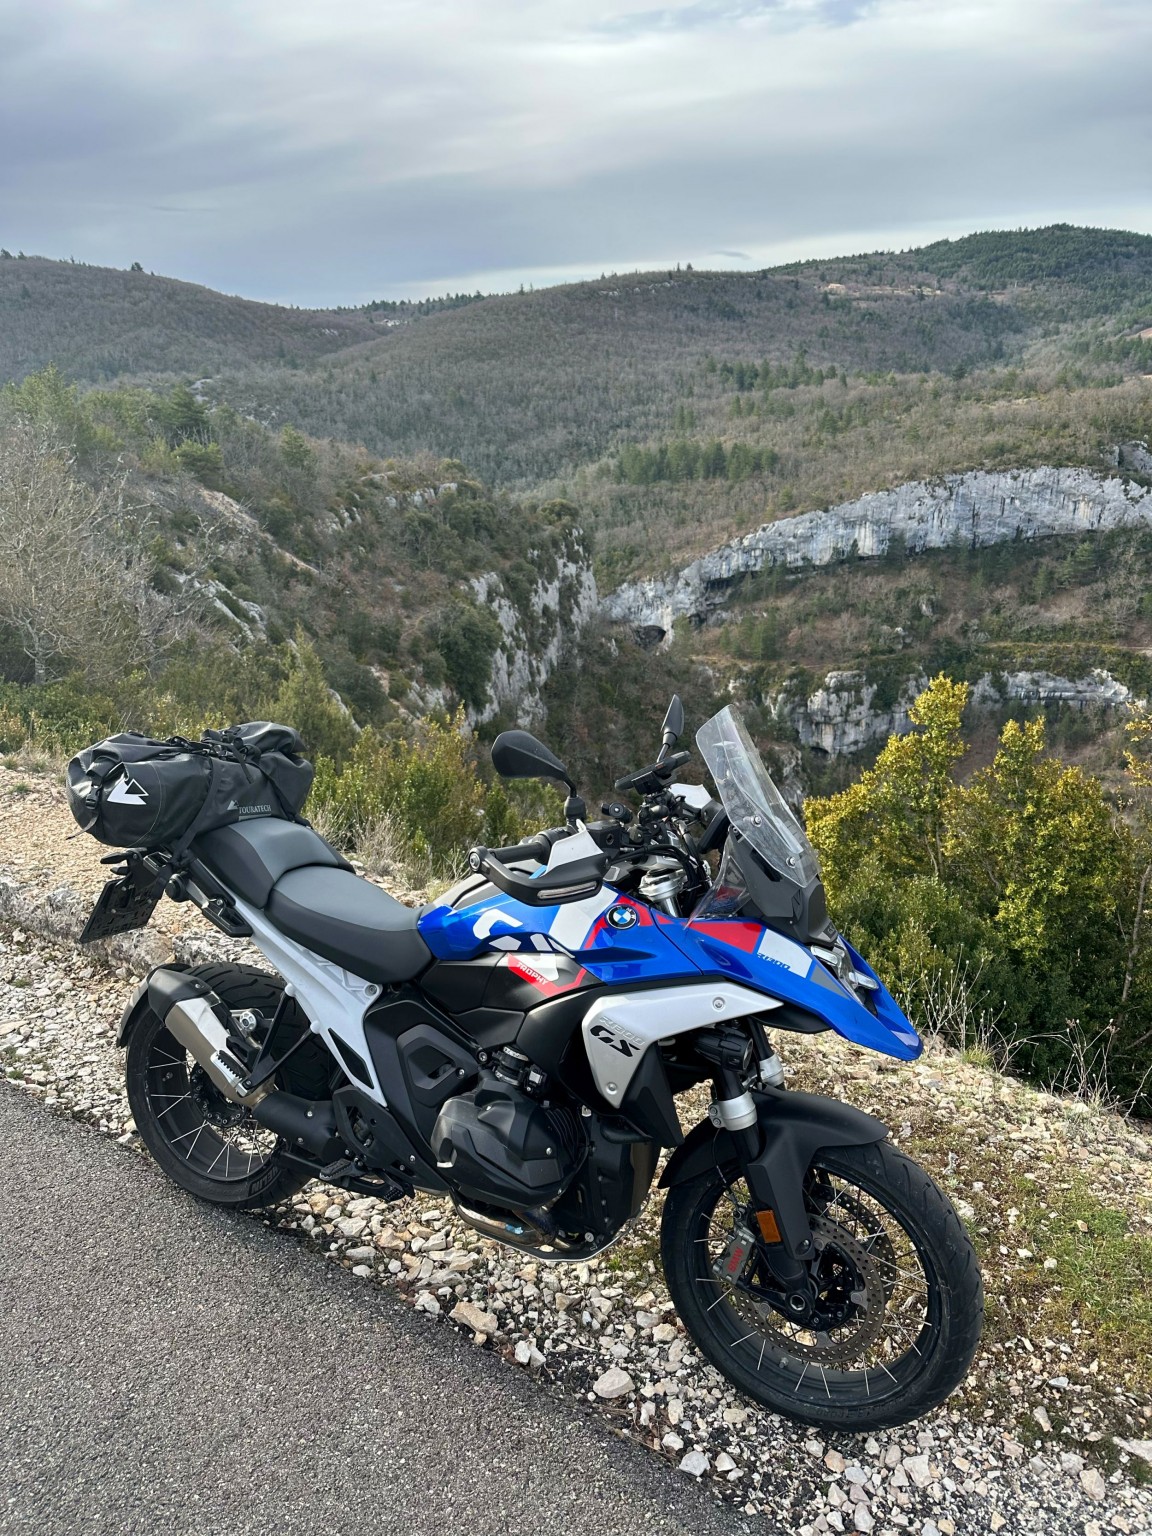 BMW R 1300 GS road test - from Barcelona to Vienna - Image 39